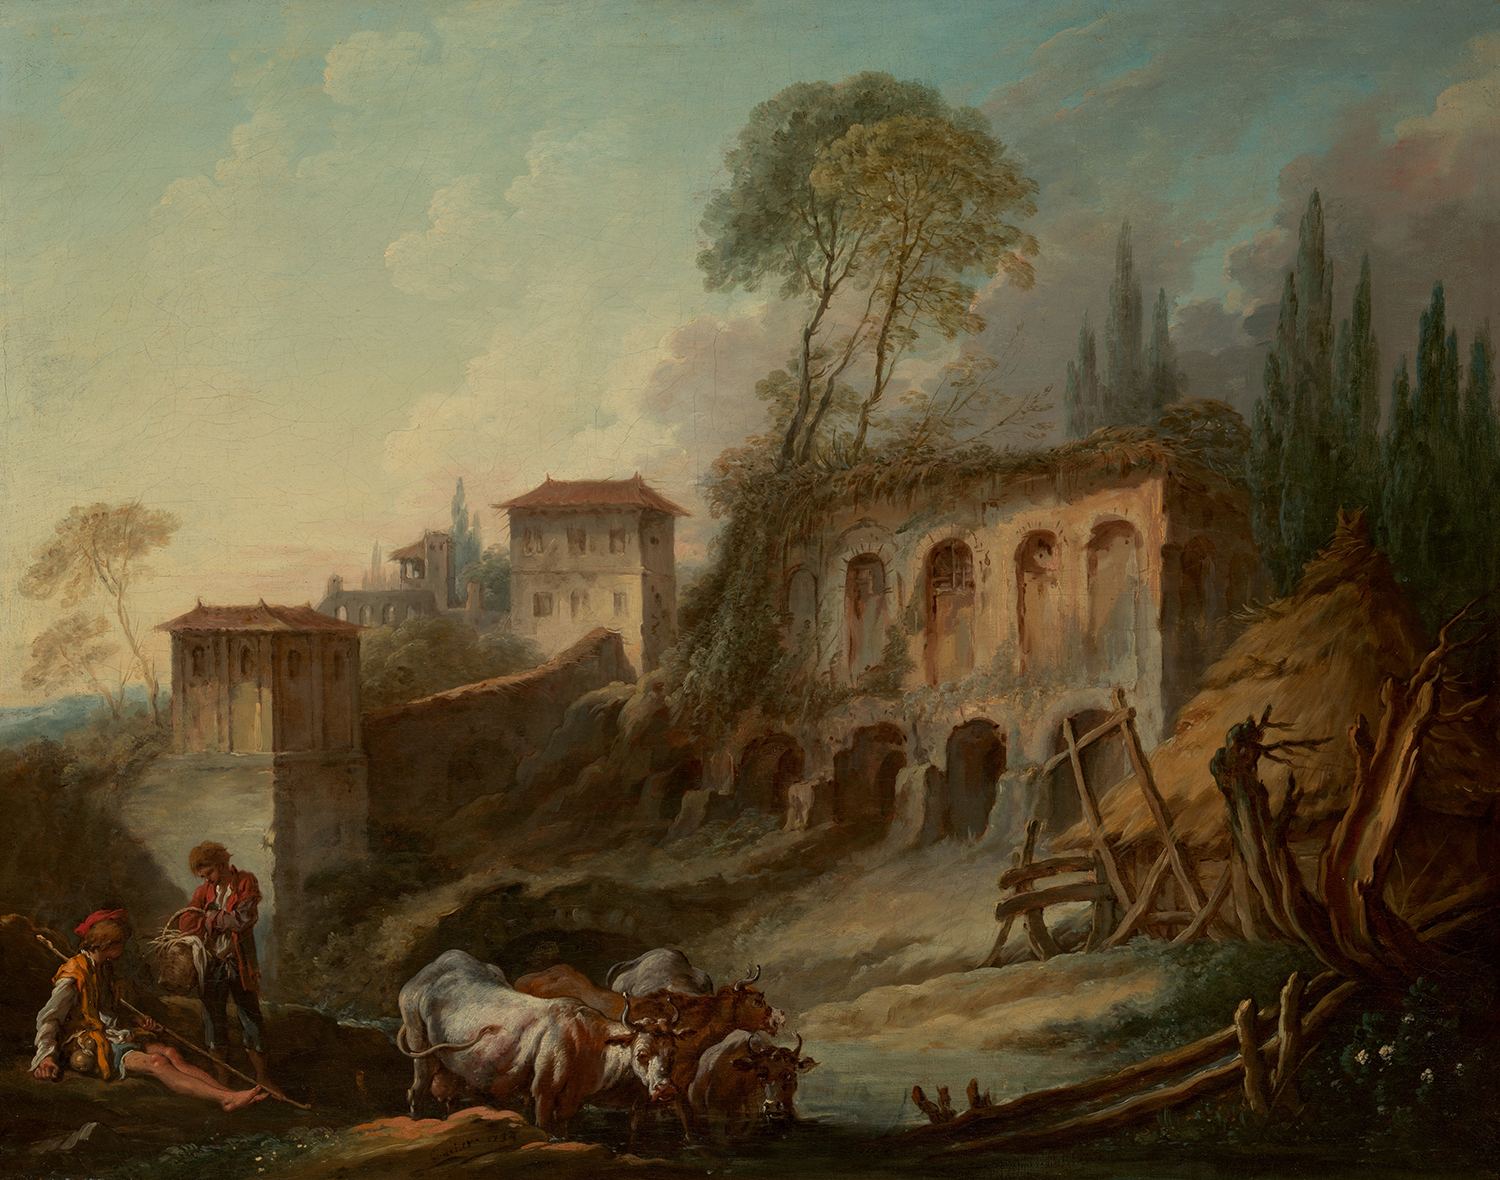 Imaginary Landscape with the Palatine Hill from Campo Vaccino, by François Boucher, 1734.